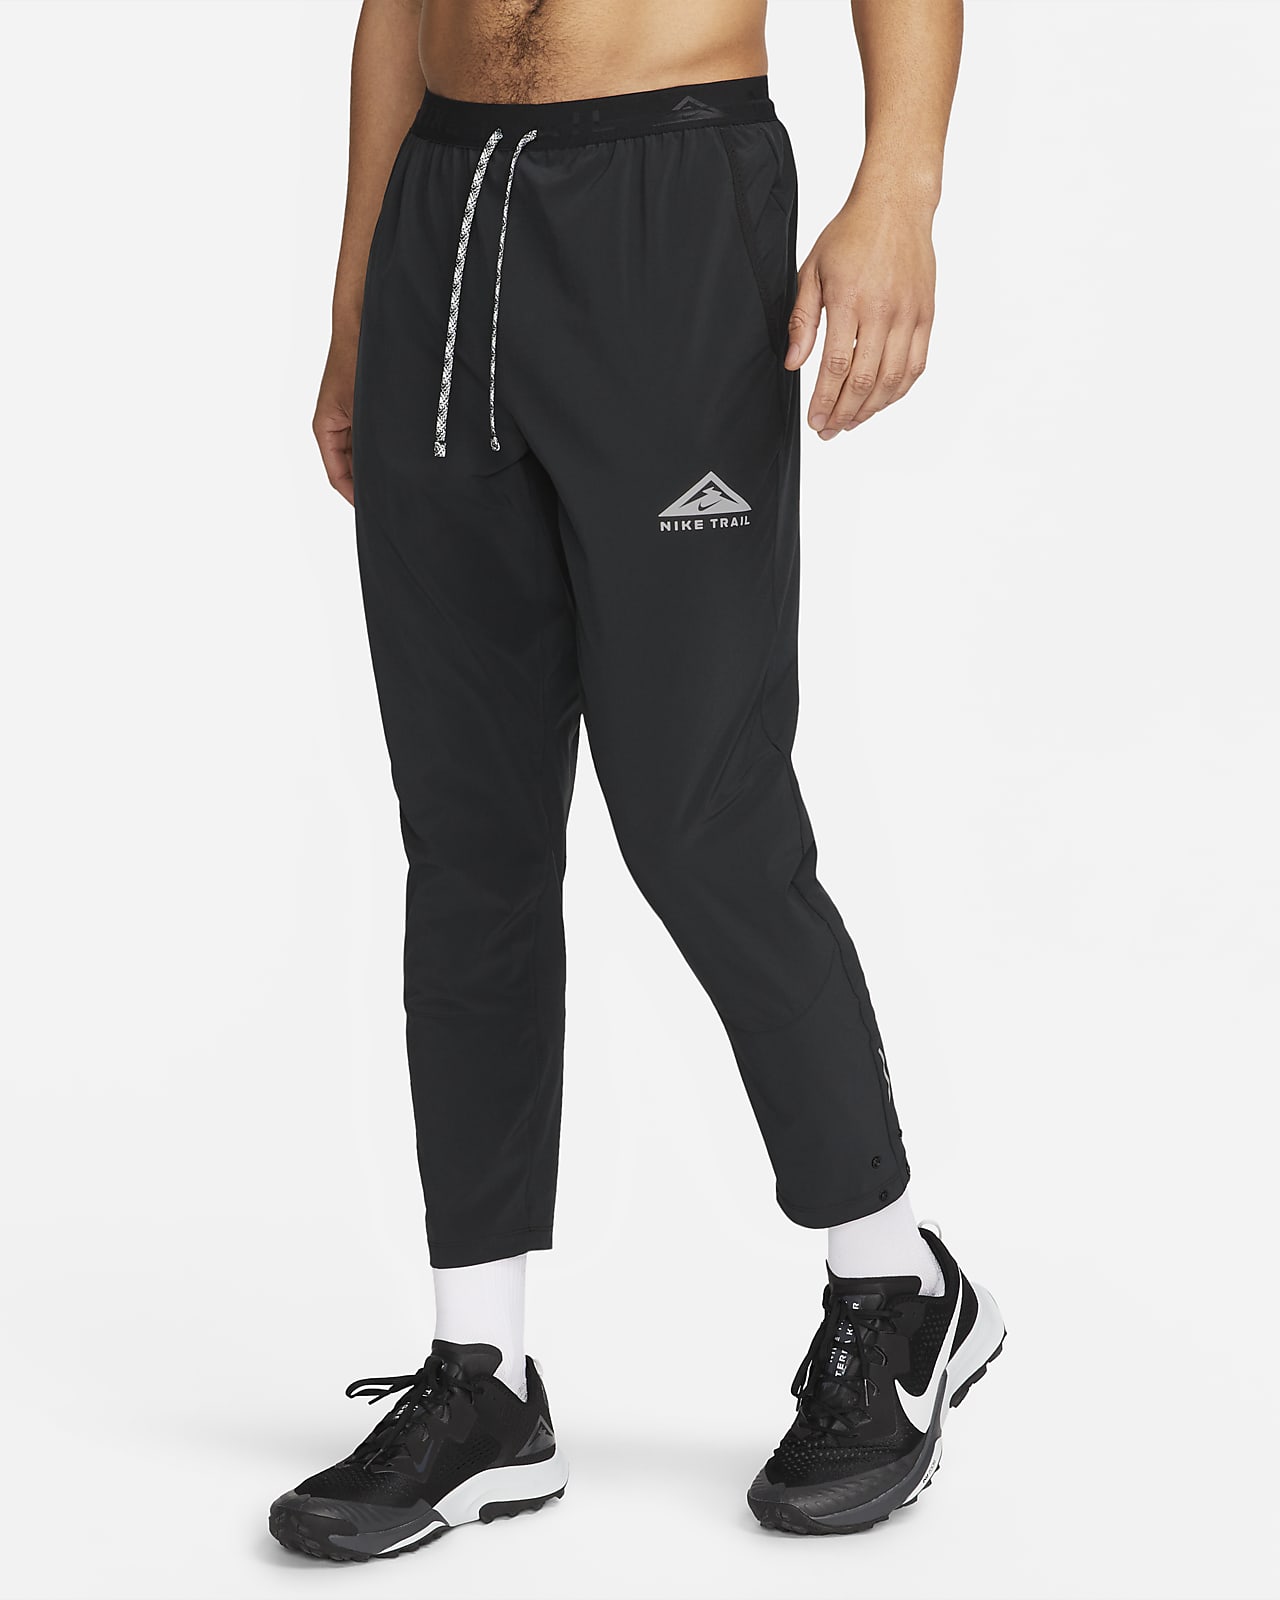 Pro Nike Tights - Buy Pro Nike Tights online in India